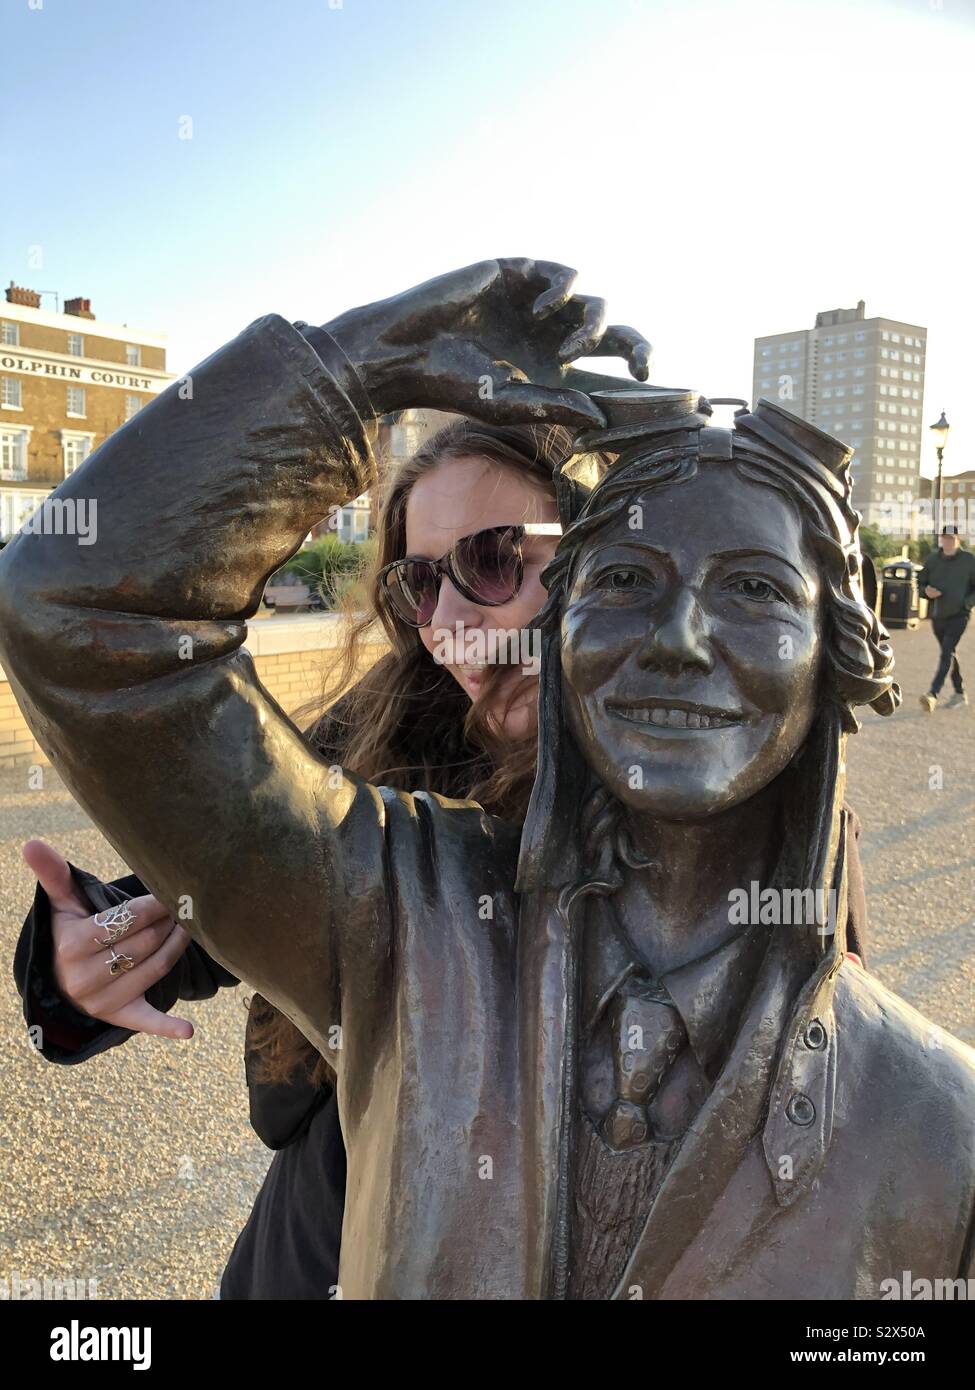 A young woman (and Amy Johnson look a like) poses joyfully with the Amy Johnson aviation sculpture at Herne Bay, Kent and captures the mood of the statue. Stock Photo